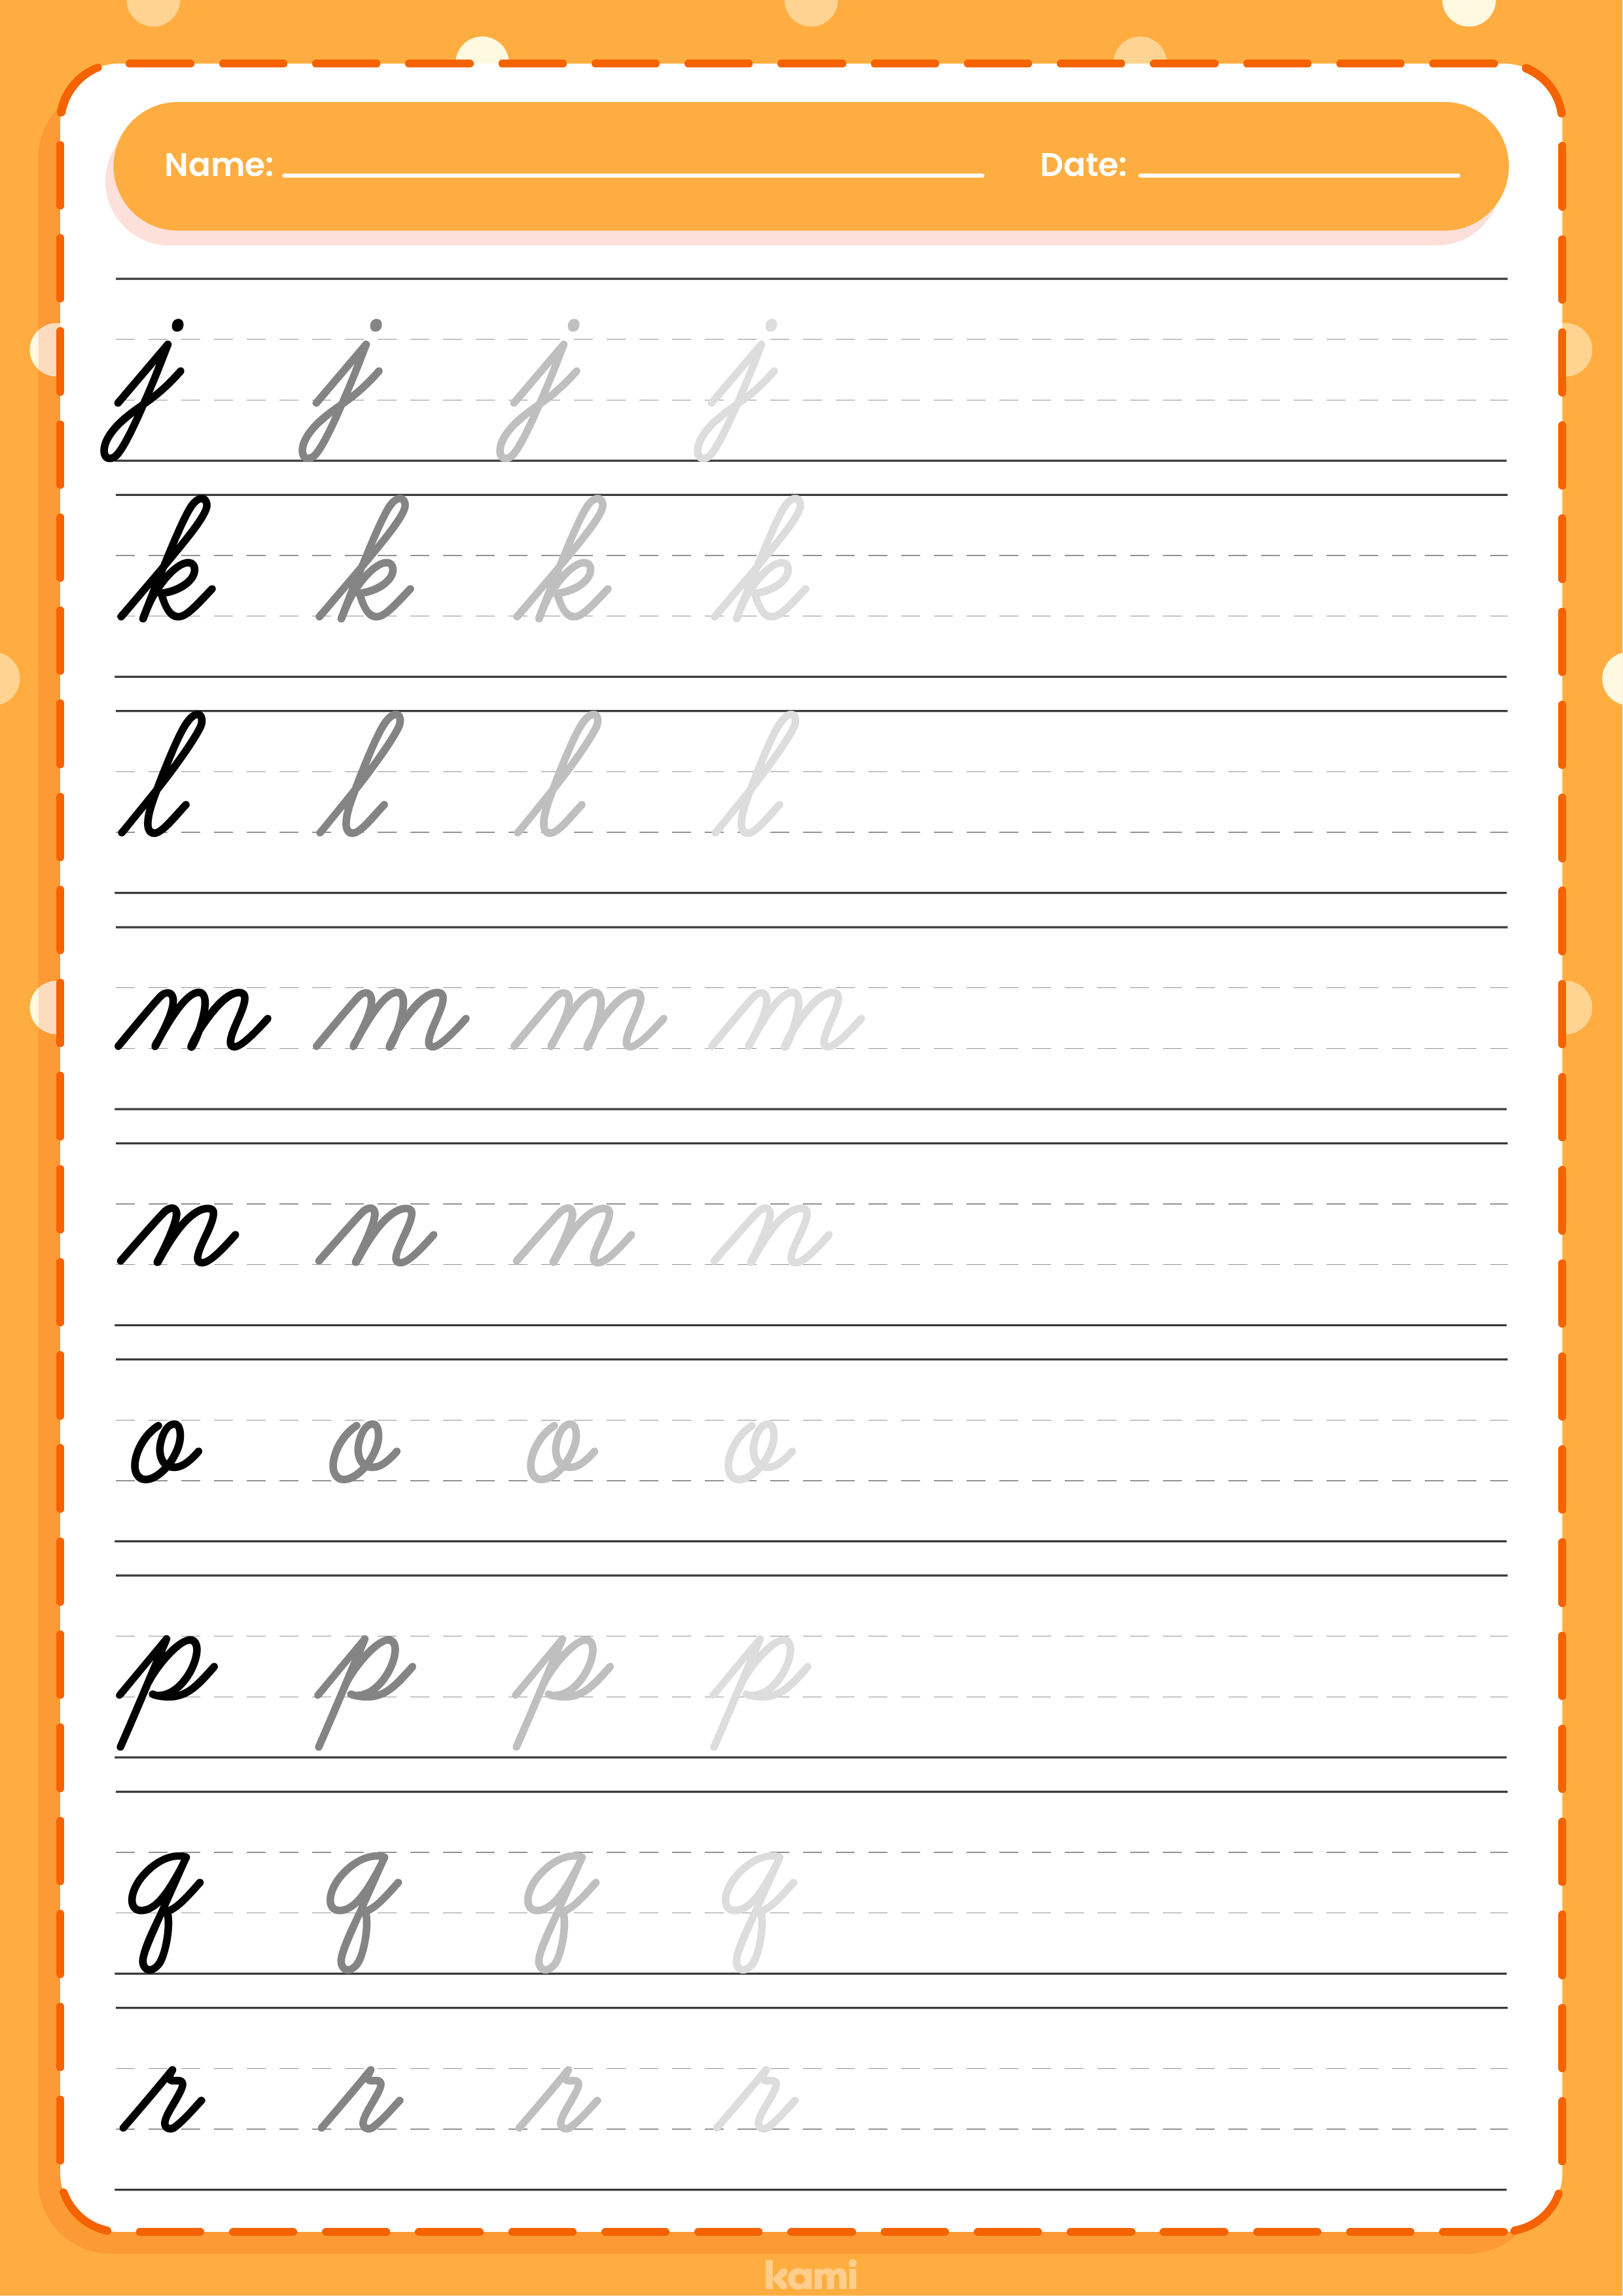 A cursive handwriting worksheet for younger learners with a orange design.